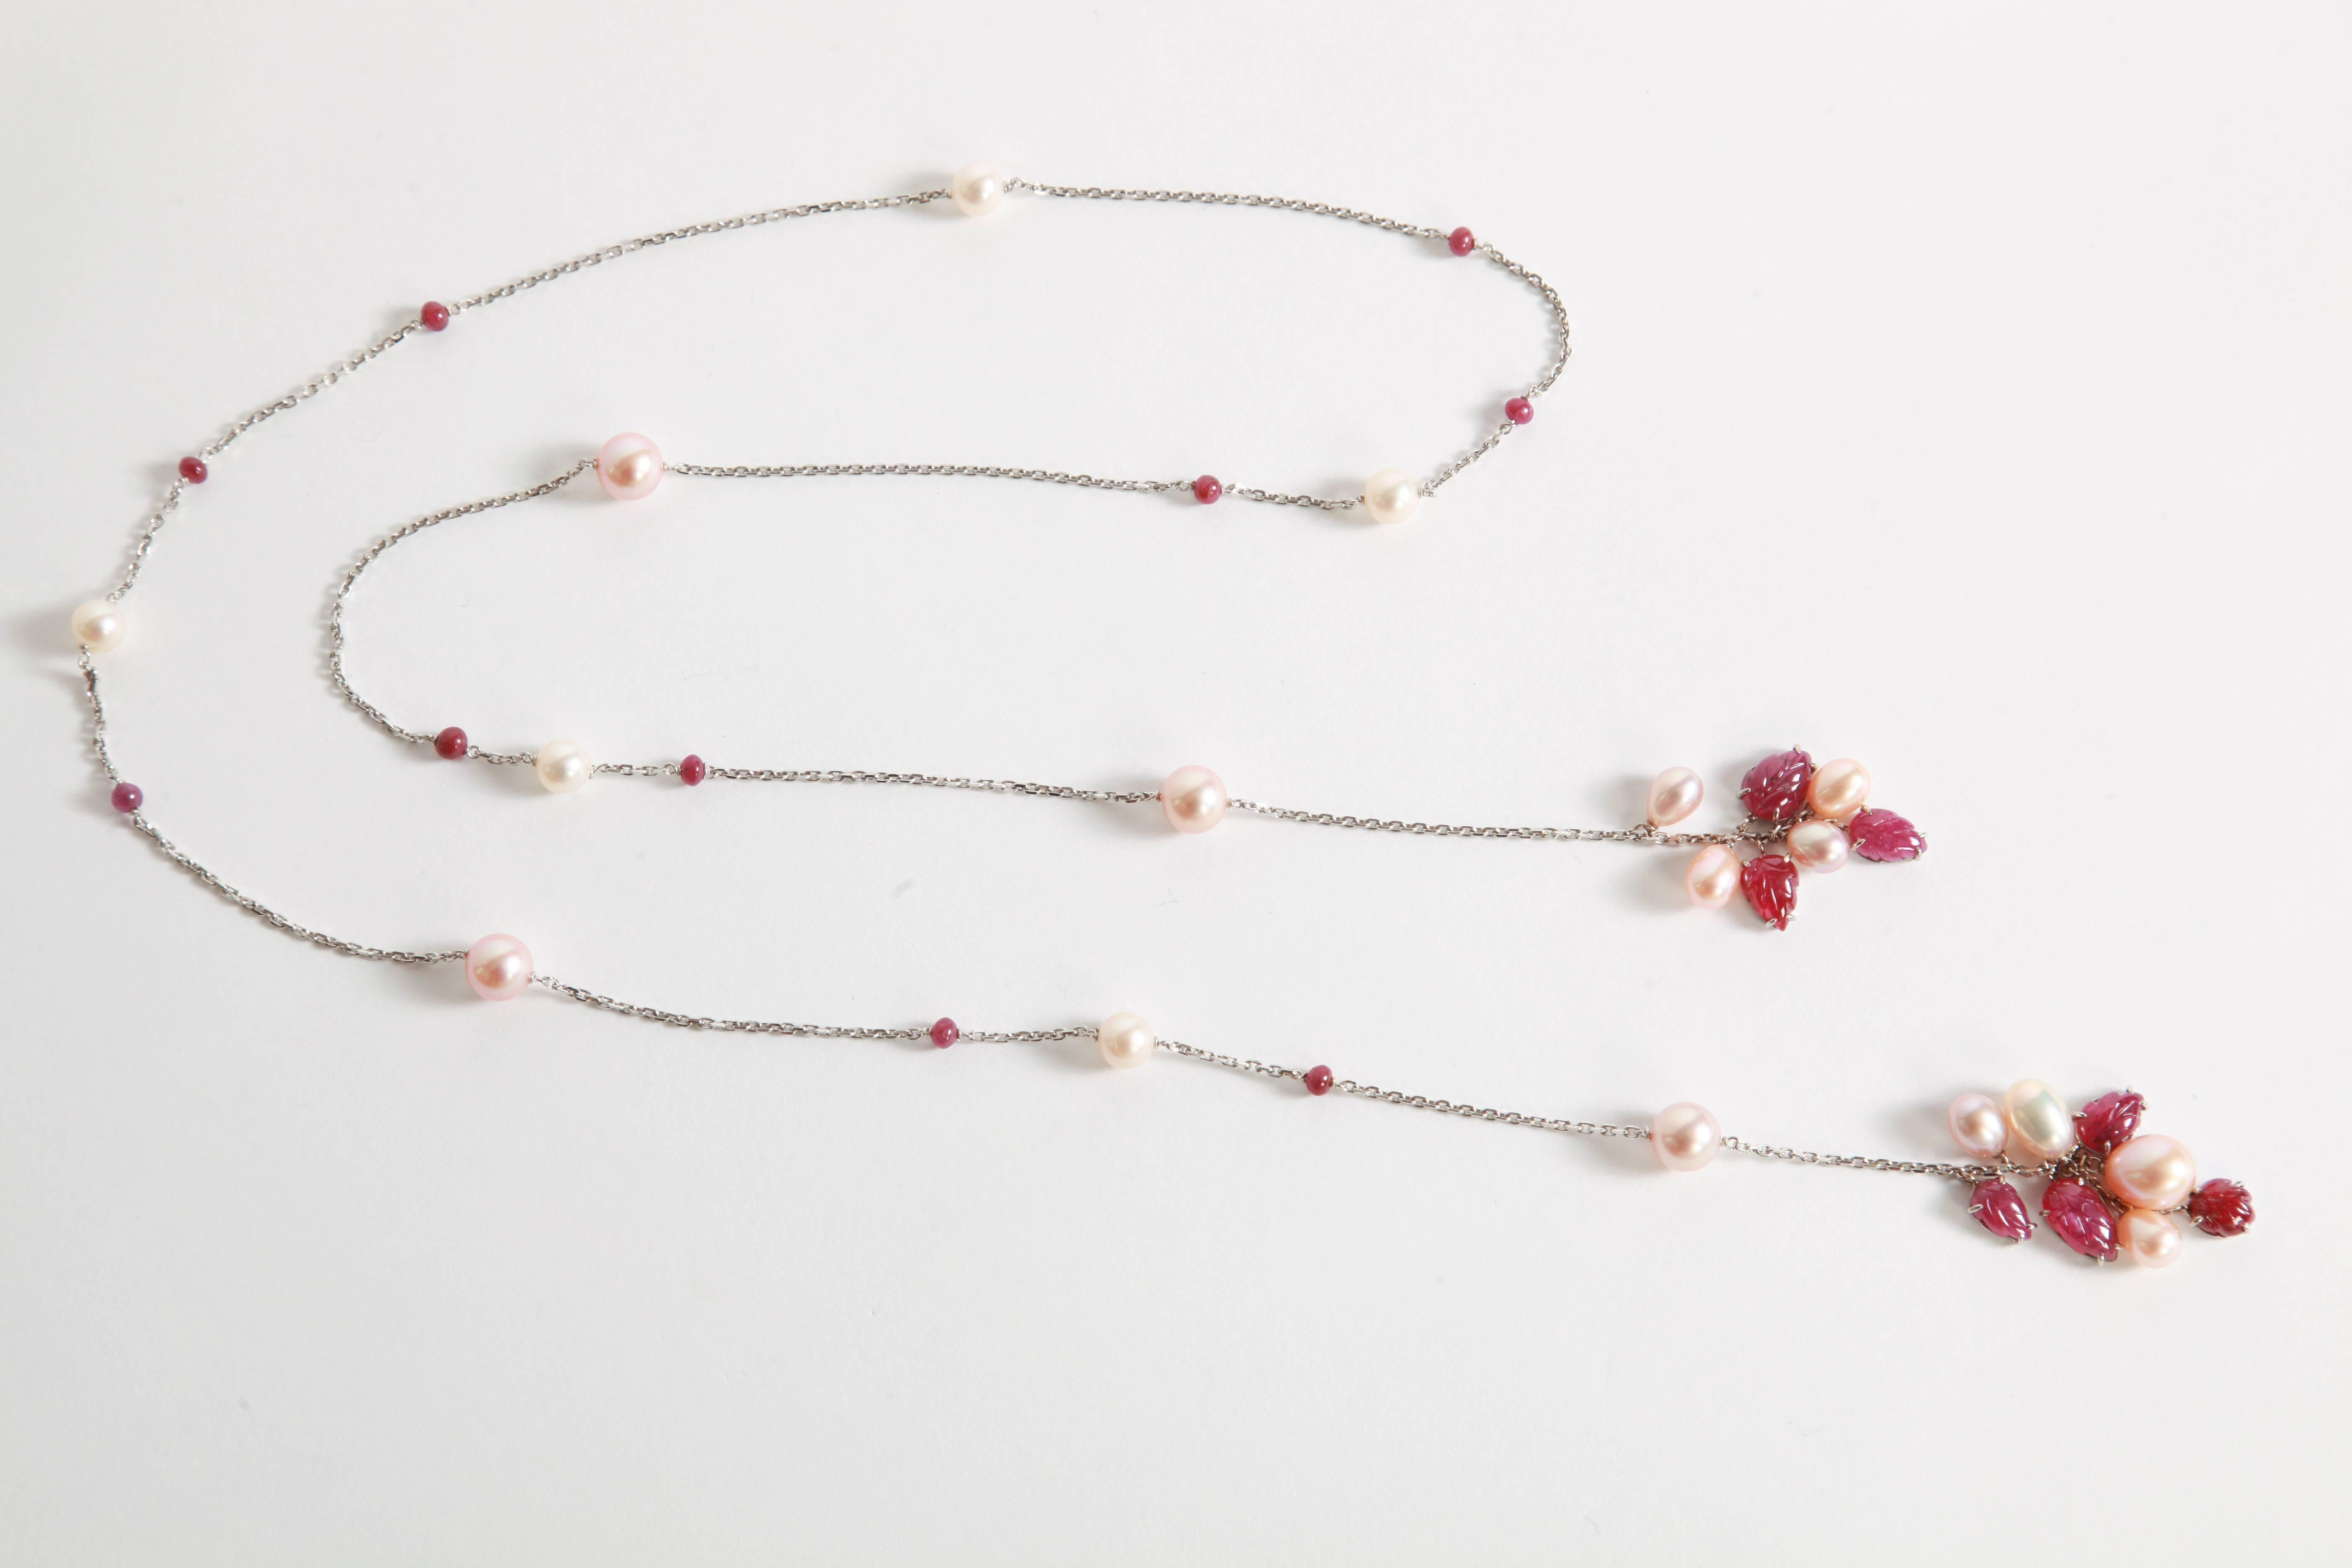 Briolette Cut Engraved Rubies and Pearls on a Long White Gold Chain by Marion Jeantet For Sale